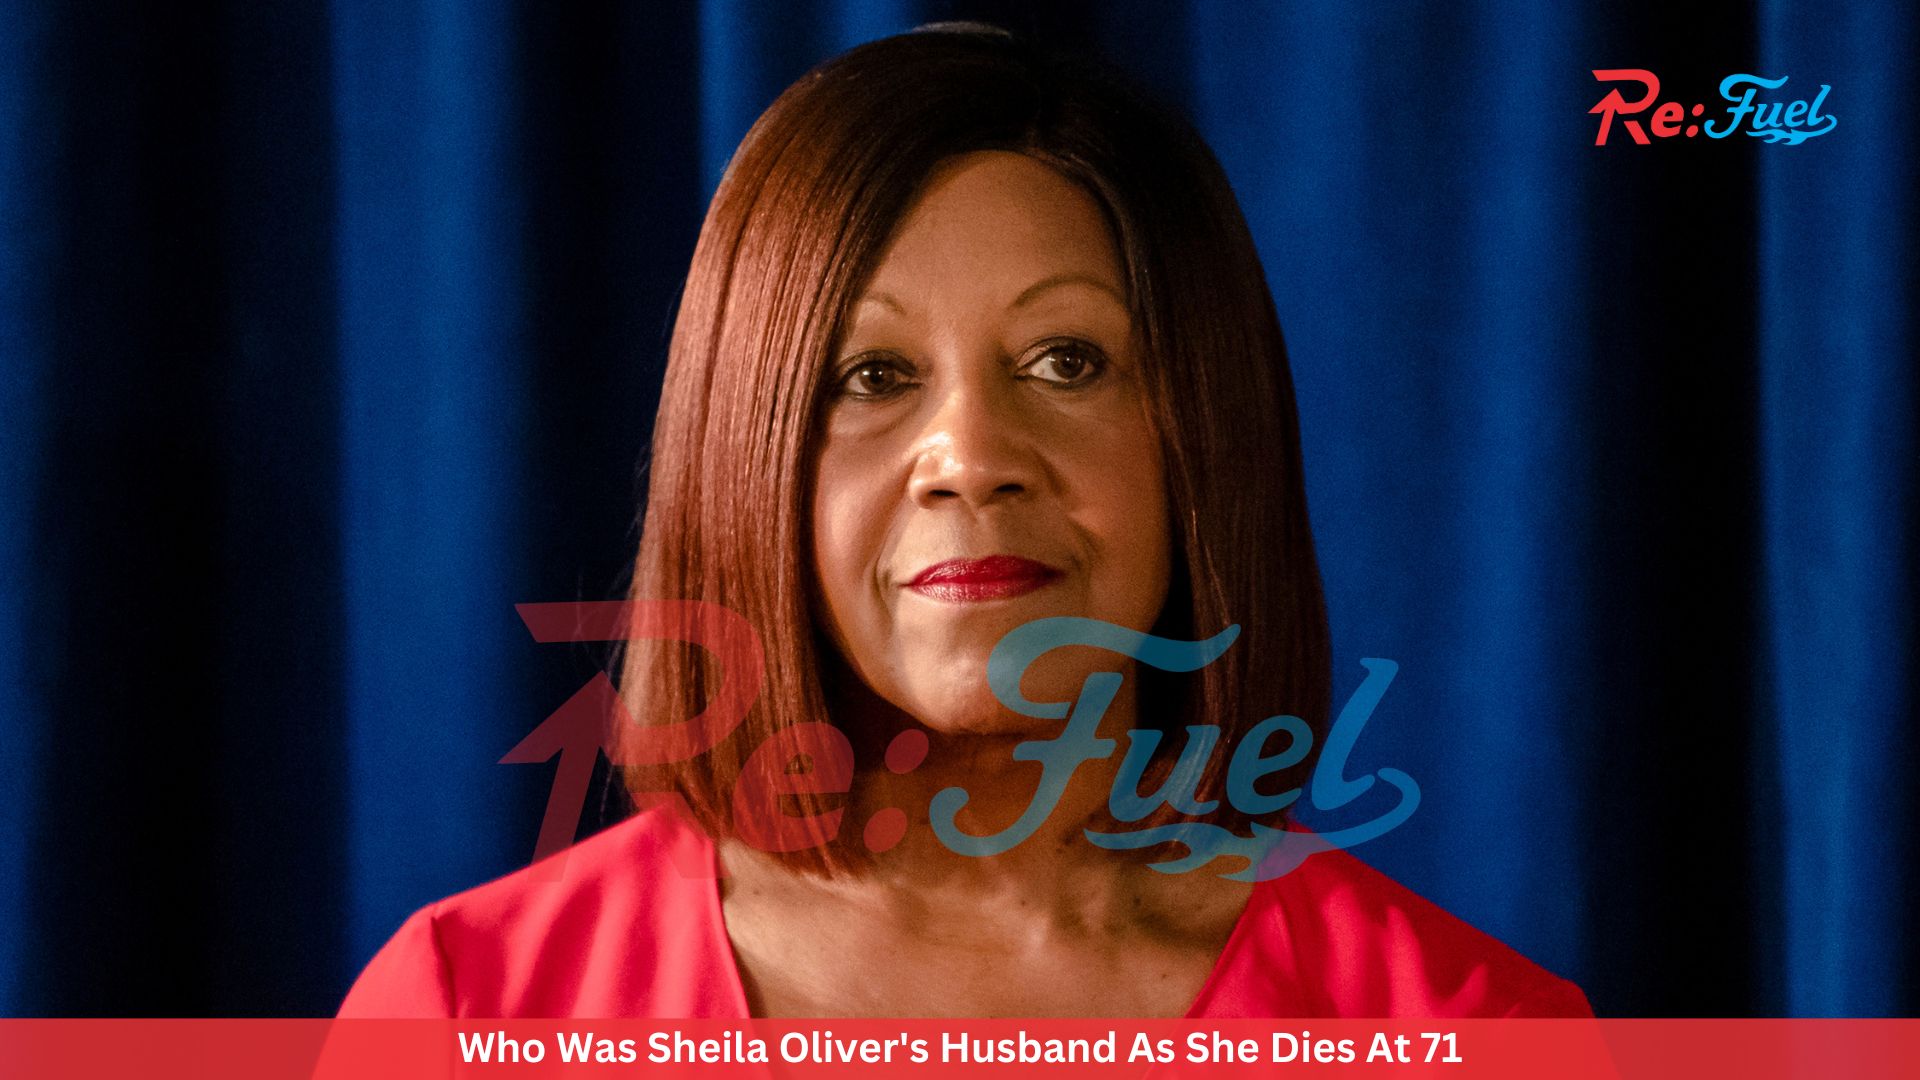 Who Was Sheila Oliver's Husband As She Dies At 71